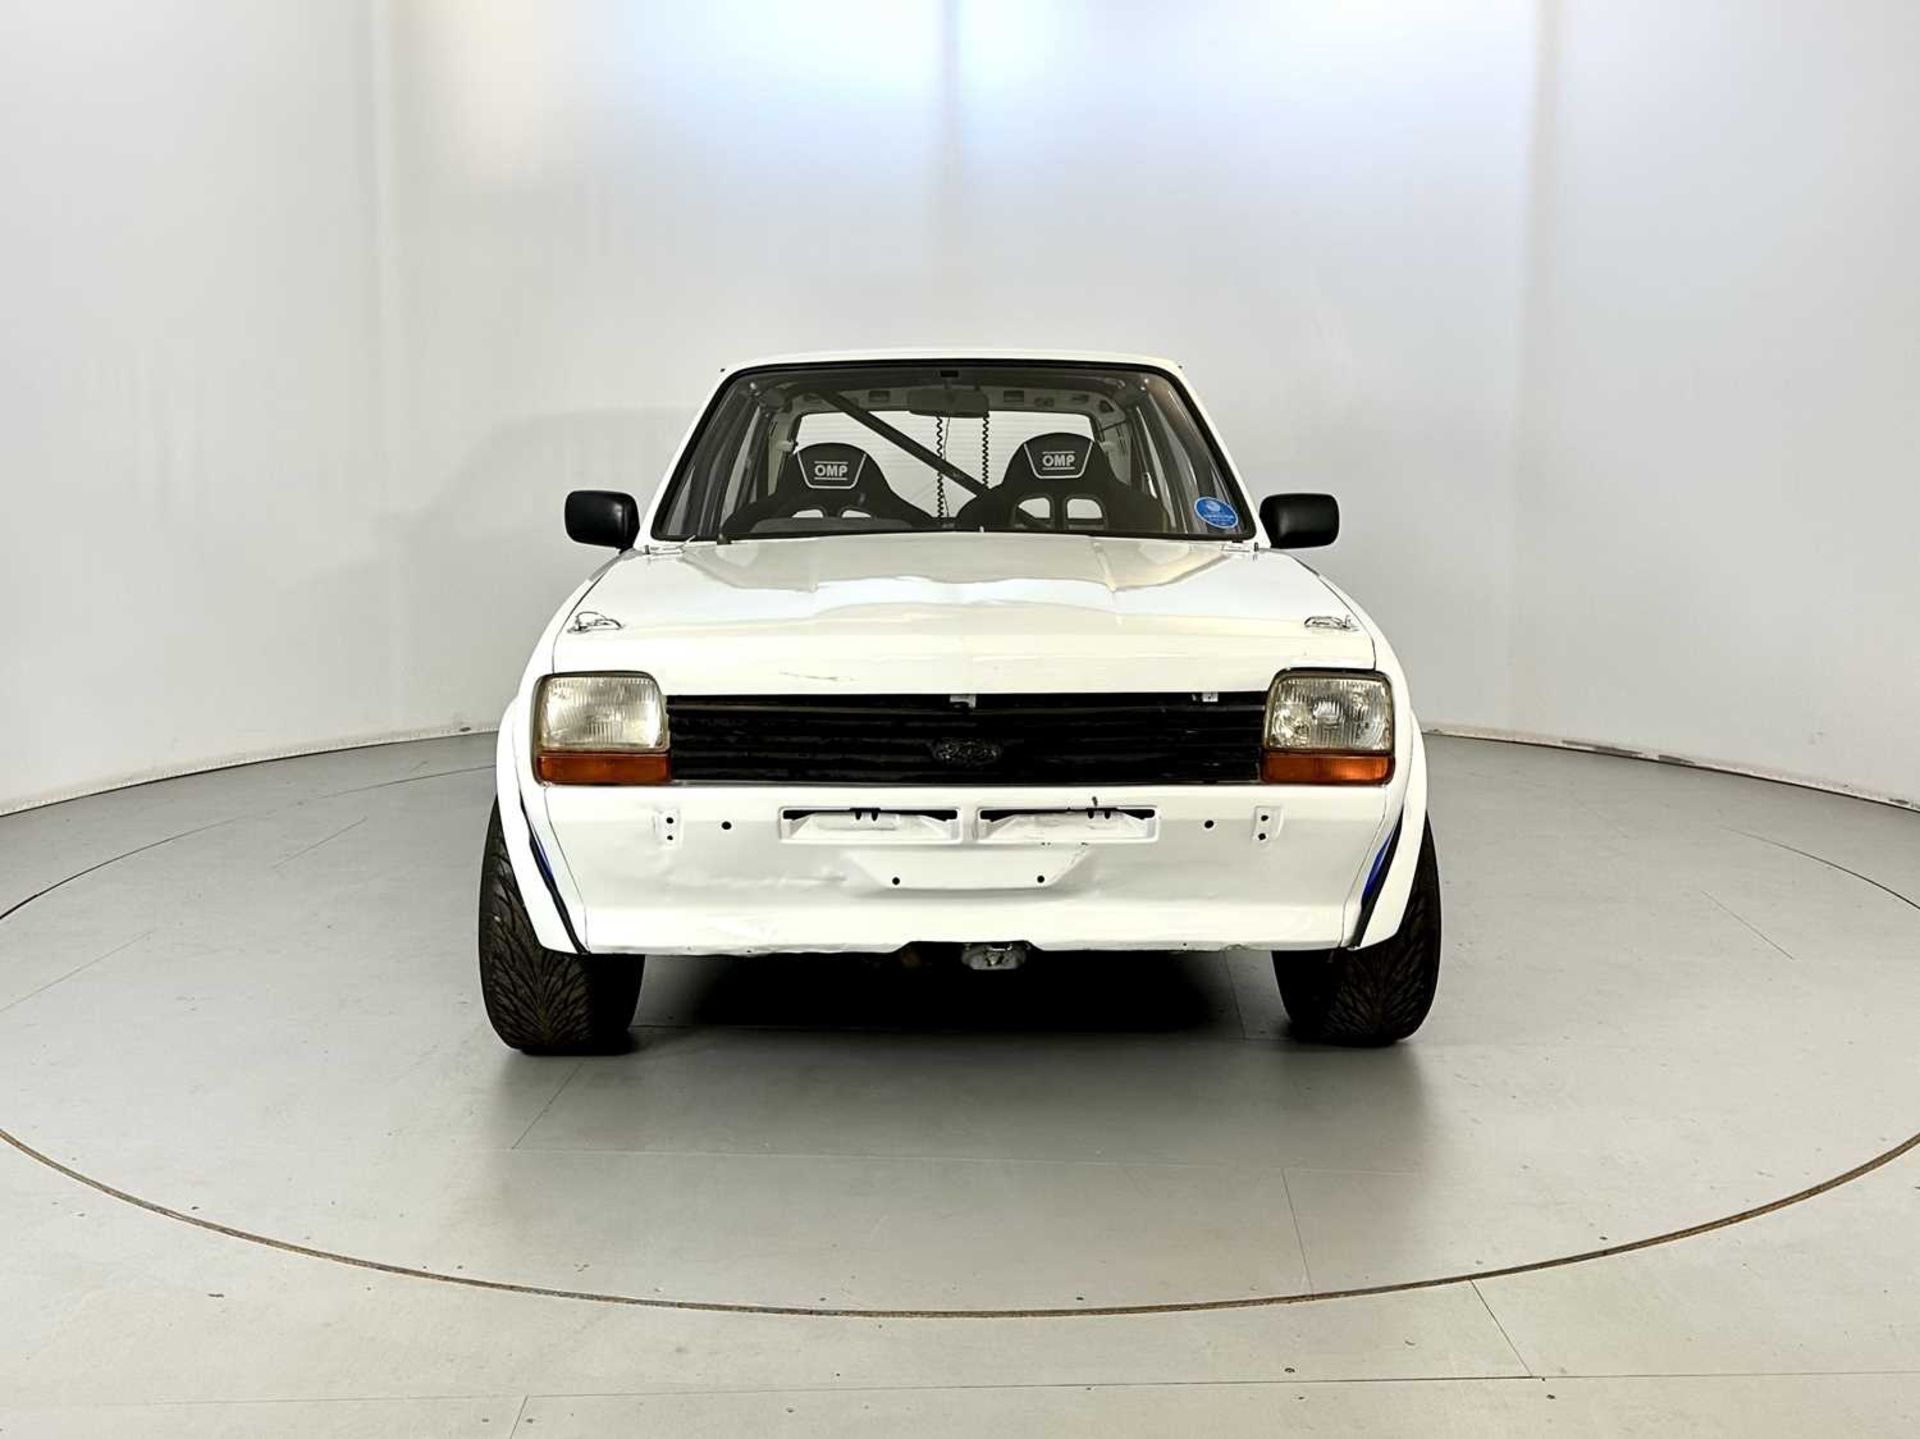 1983 Ford Fiesta XR2 - Image 2 of 28